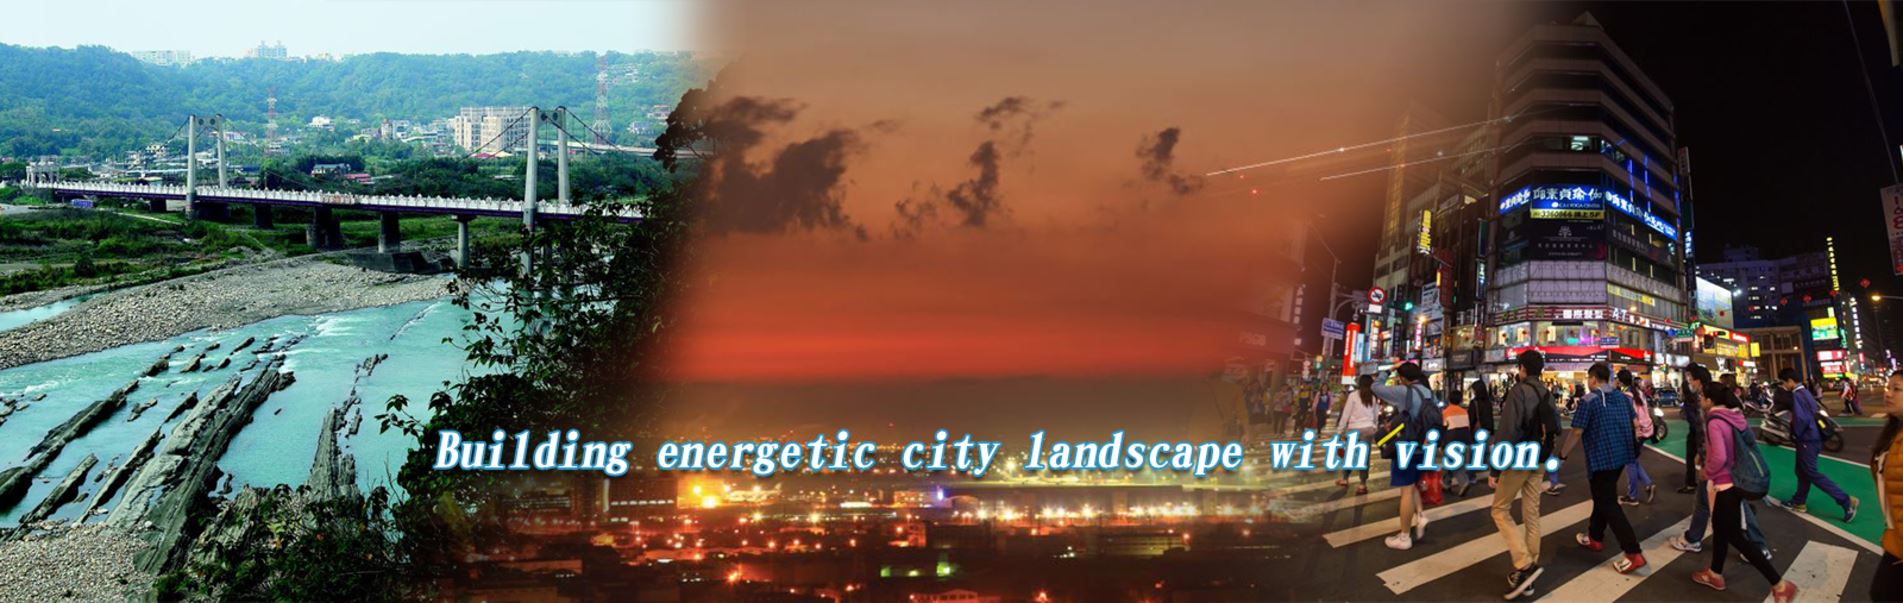 Building energetic city landscape with vision.